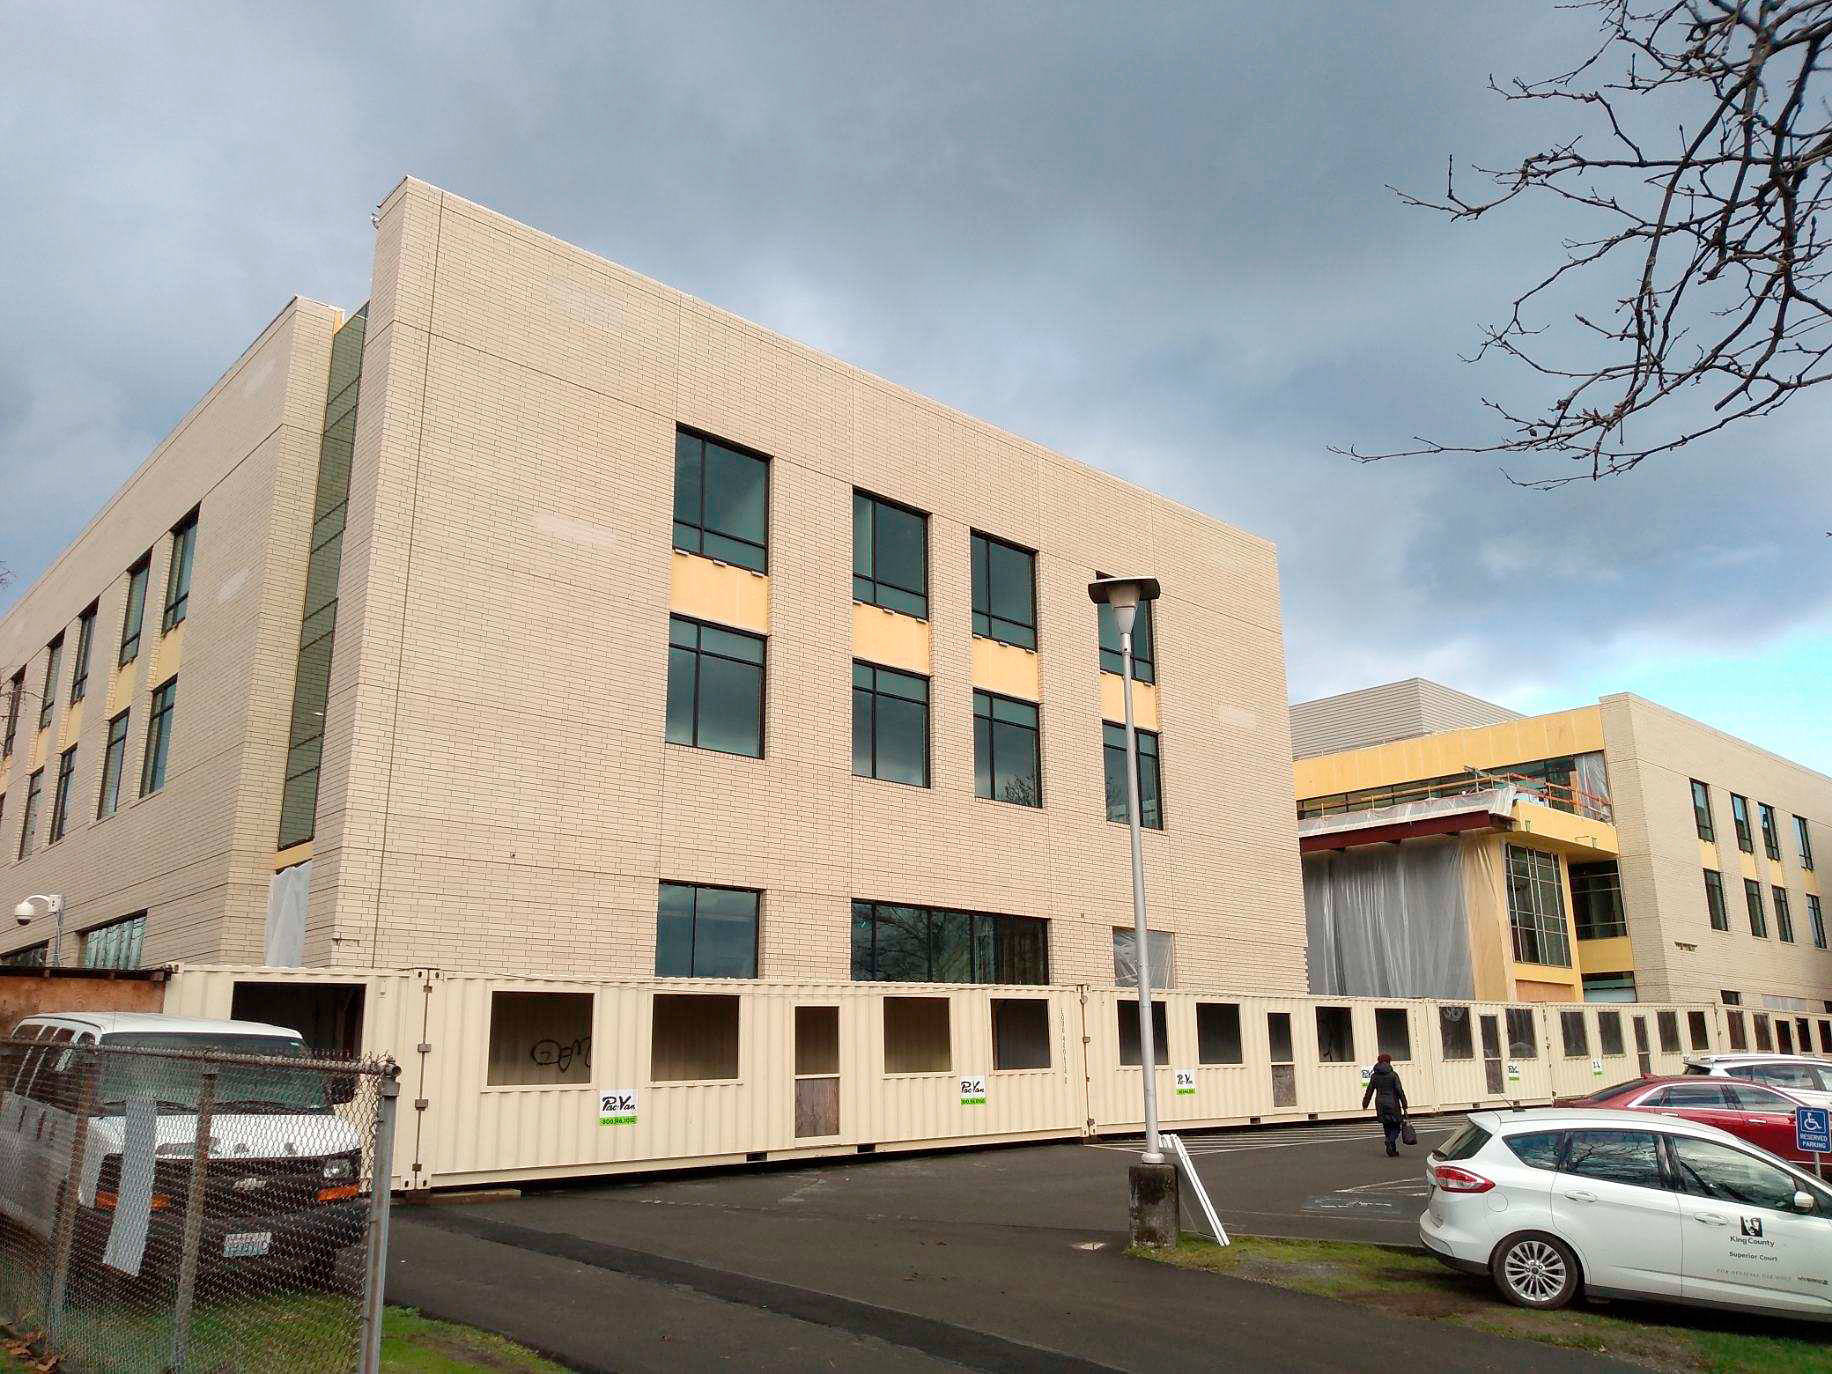 The $210 million levy is being used to fund a replacement for the Youth Services Center with the Children and Family Justice Center in Seattle’s Central District on 12th Avenue and Alder Street. Photo by Aaron Kunkler